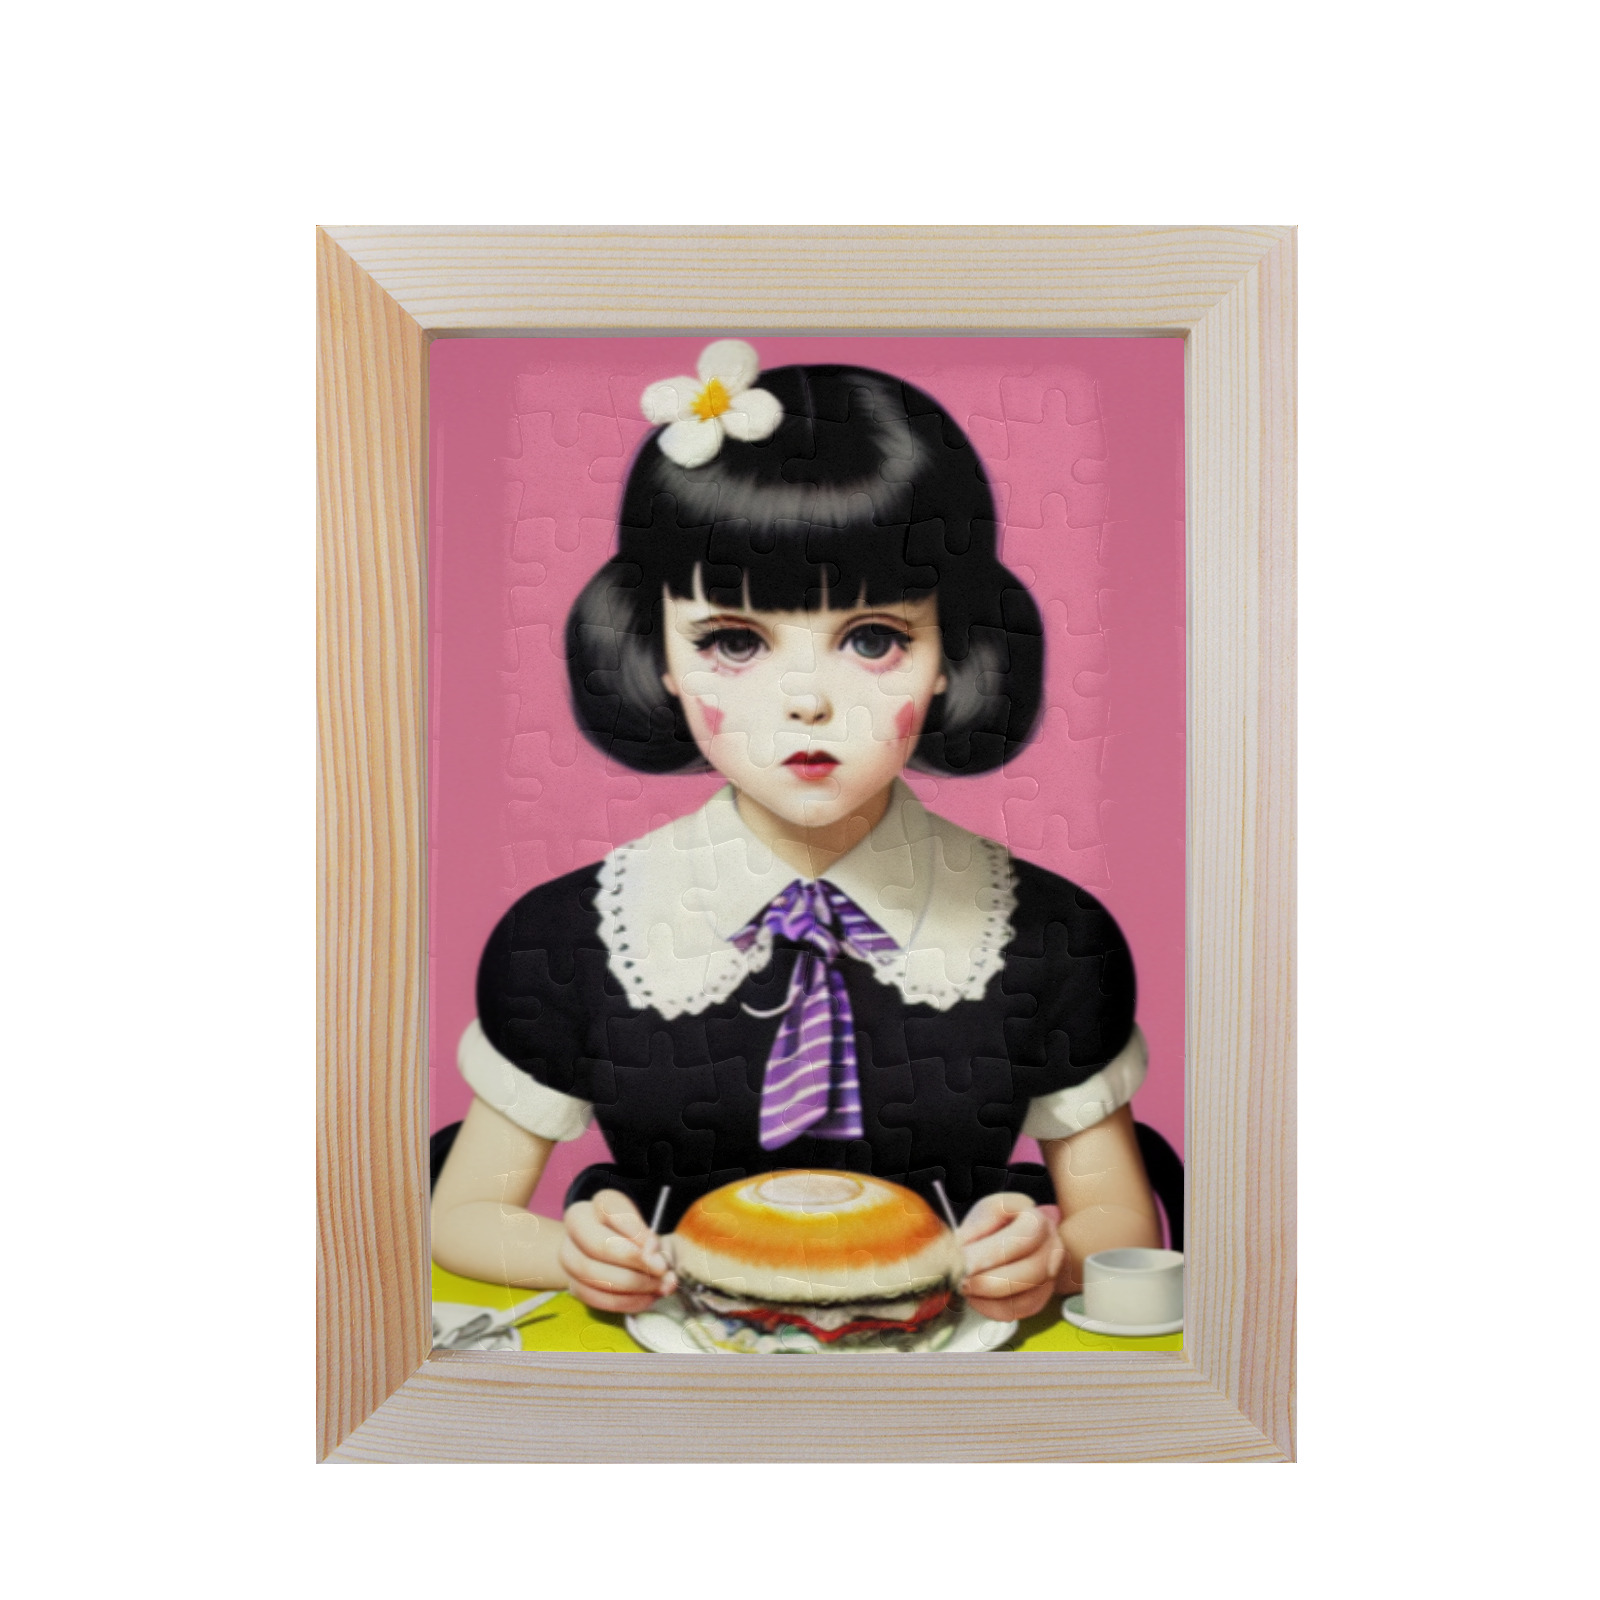 gothic girl with lipstick 67 80-Piece Puzzle Frame 7"x 9"